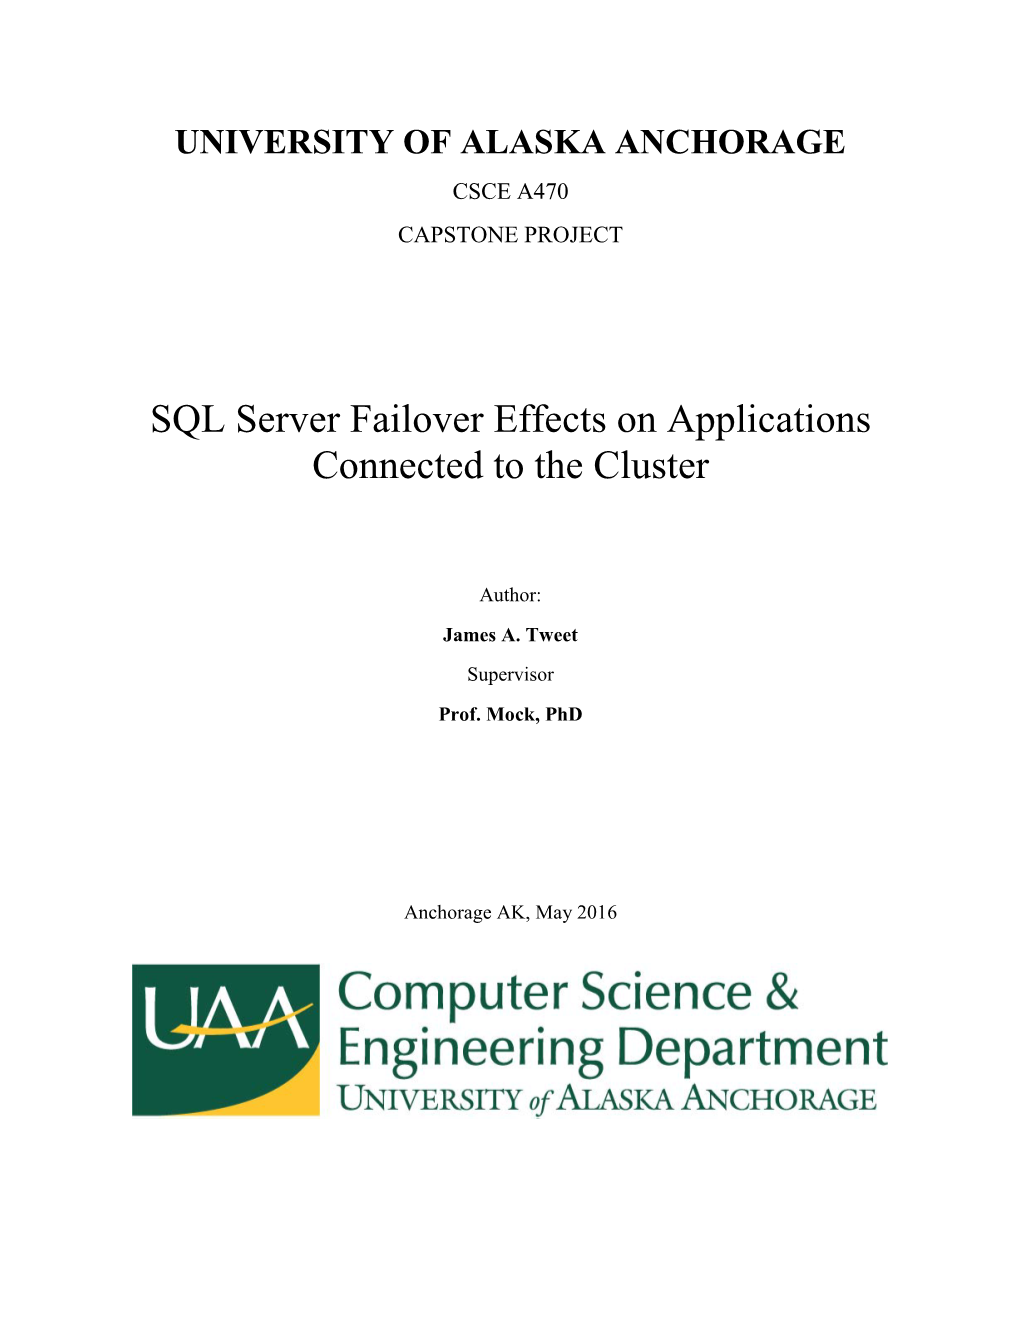 SQL Server Failover Effects on Applications Connected to the Cluster